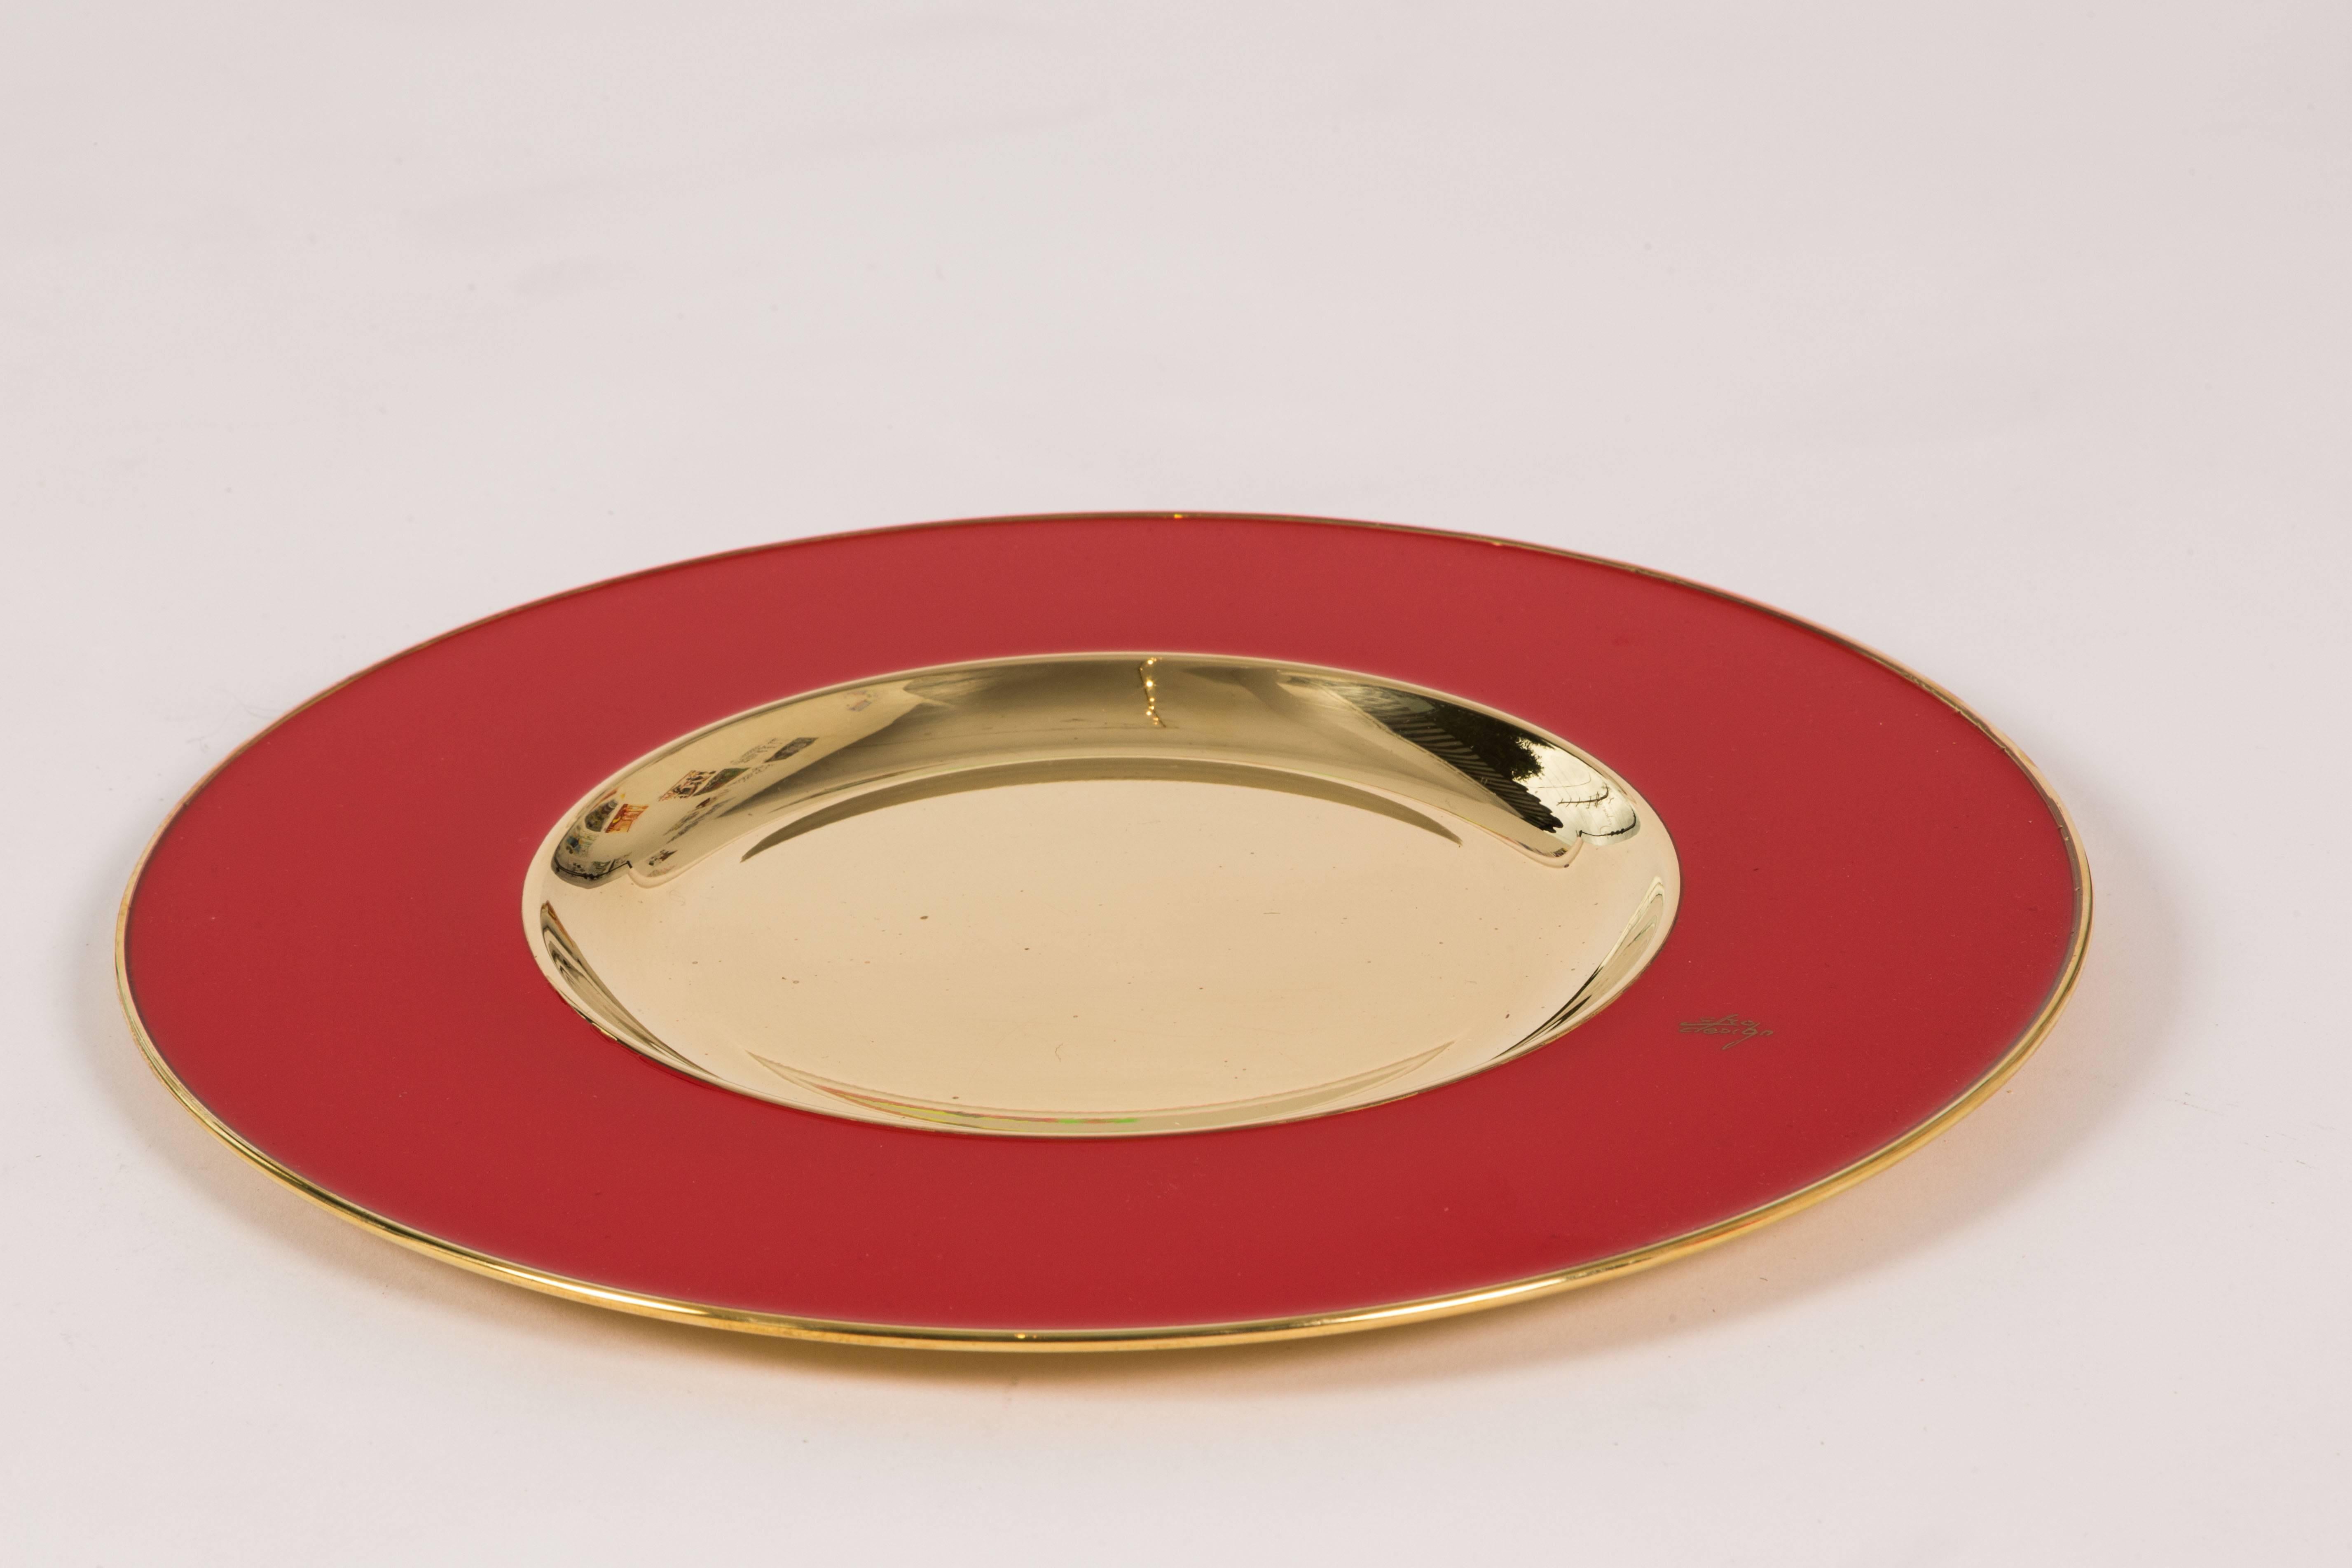 A fabulous group of six table chargers in brilliant red and brass. The chargers are signed on the face with Etro Design; and I am not sure if this is the same Etro that makes clothing. They are quite striking. There are a total of seven chargers,